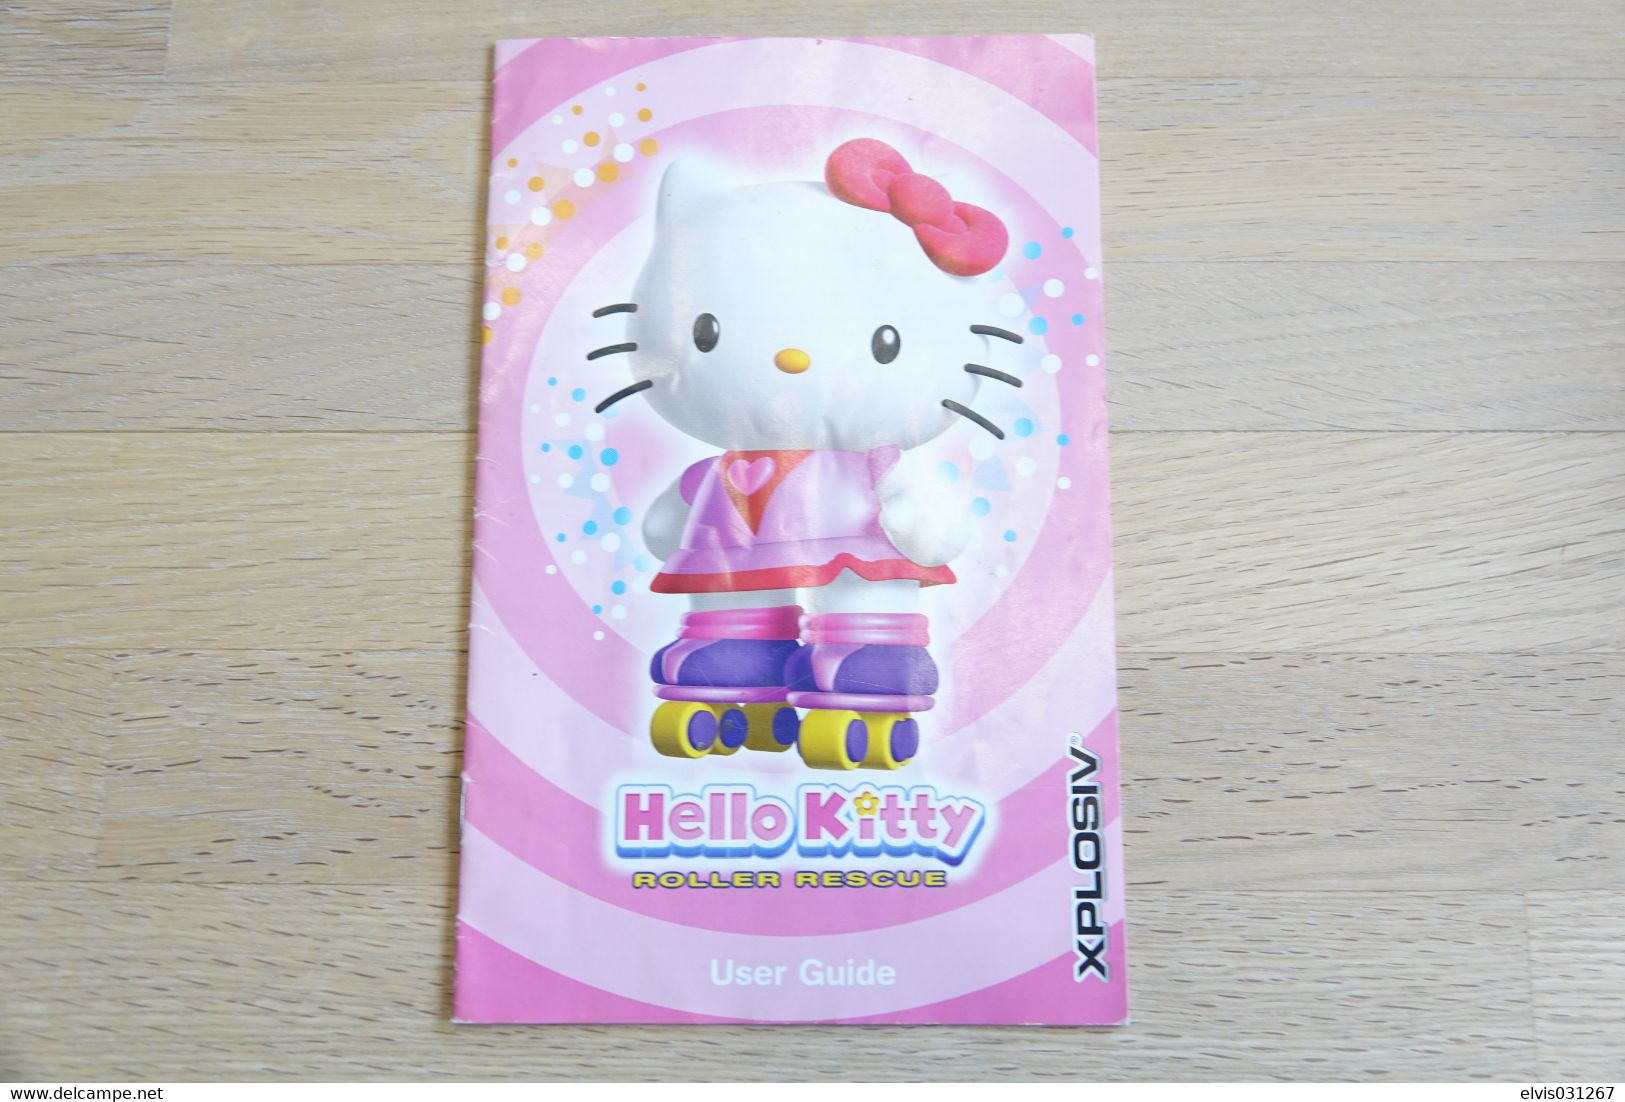 SONY PLAYSTATION TWO 2 PS2 : MANUAL : HELLO KITTY ROLLER RESCUE - Literatur Und Anleitungen